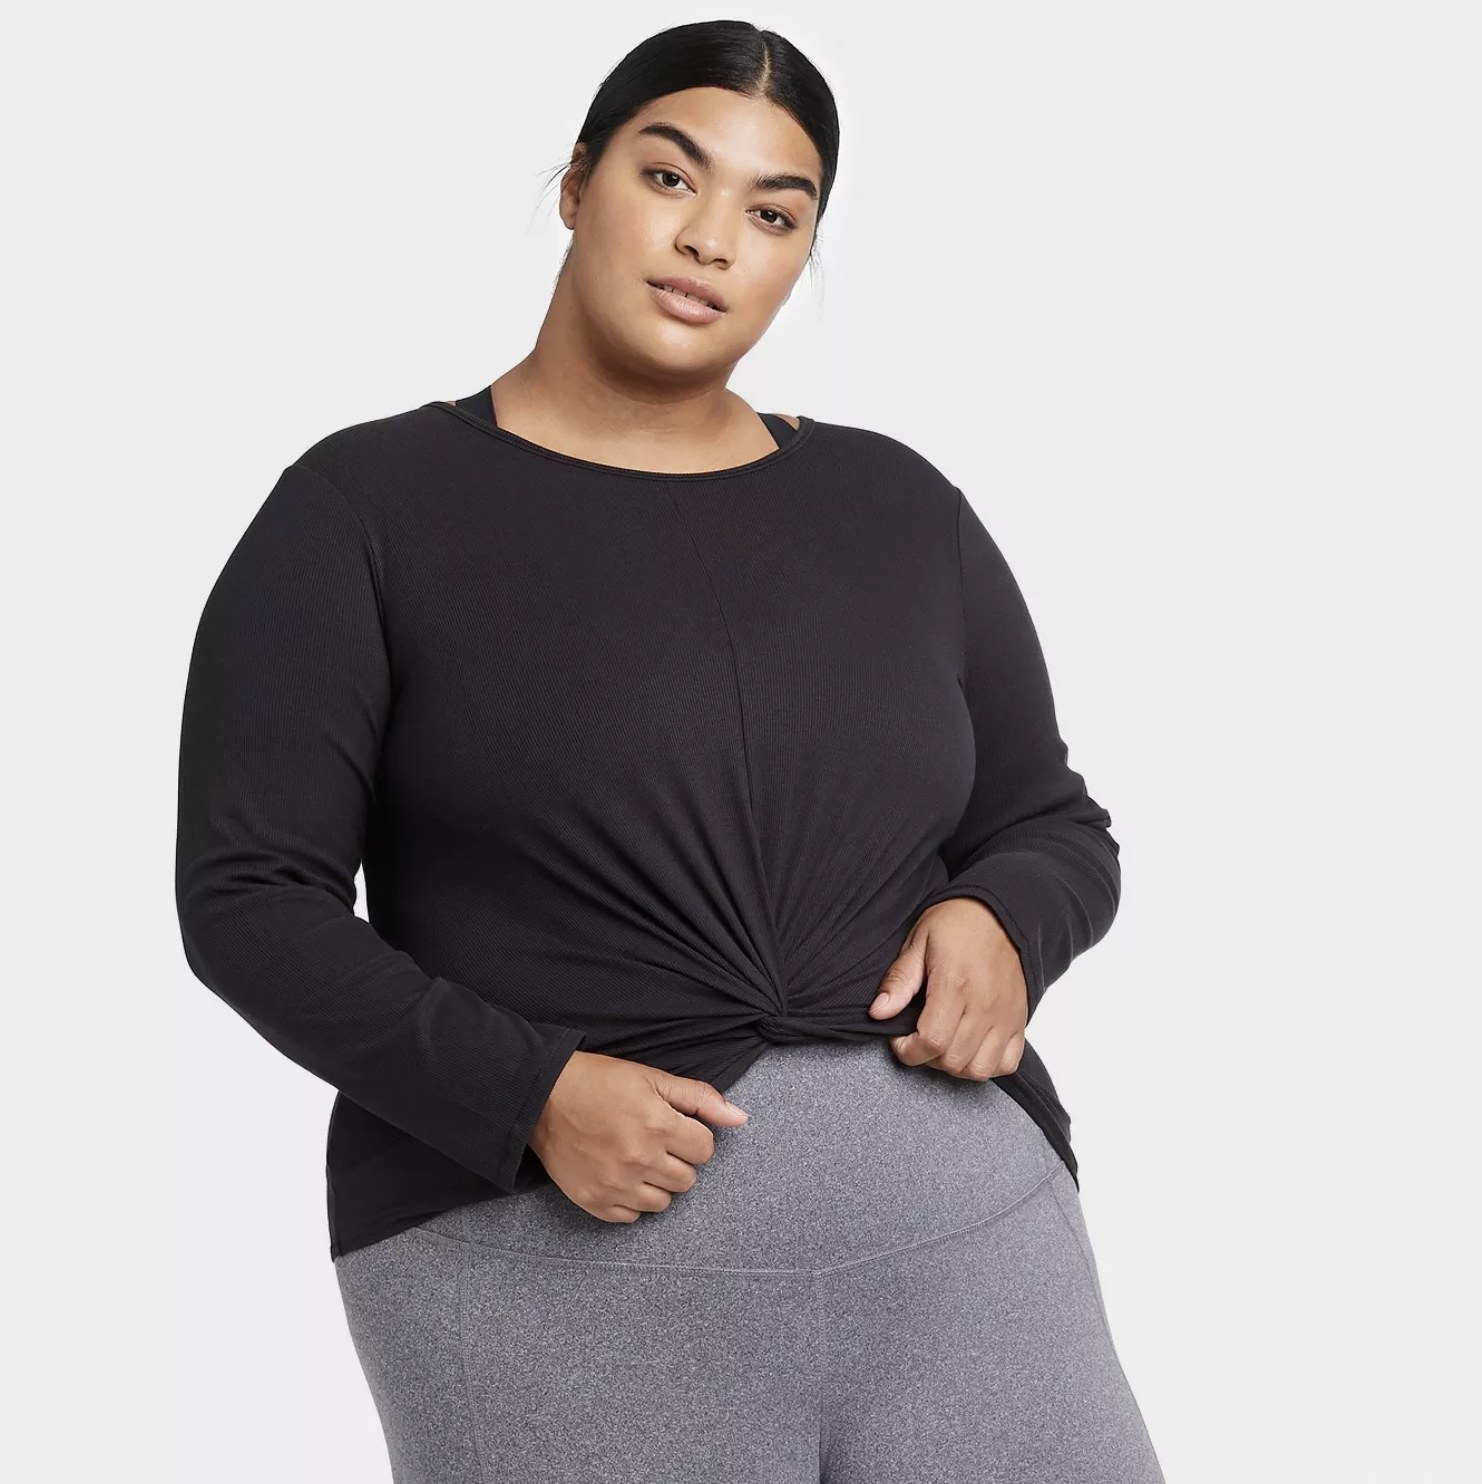 Clothing From Target For Those Who Always Wear Black